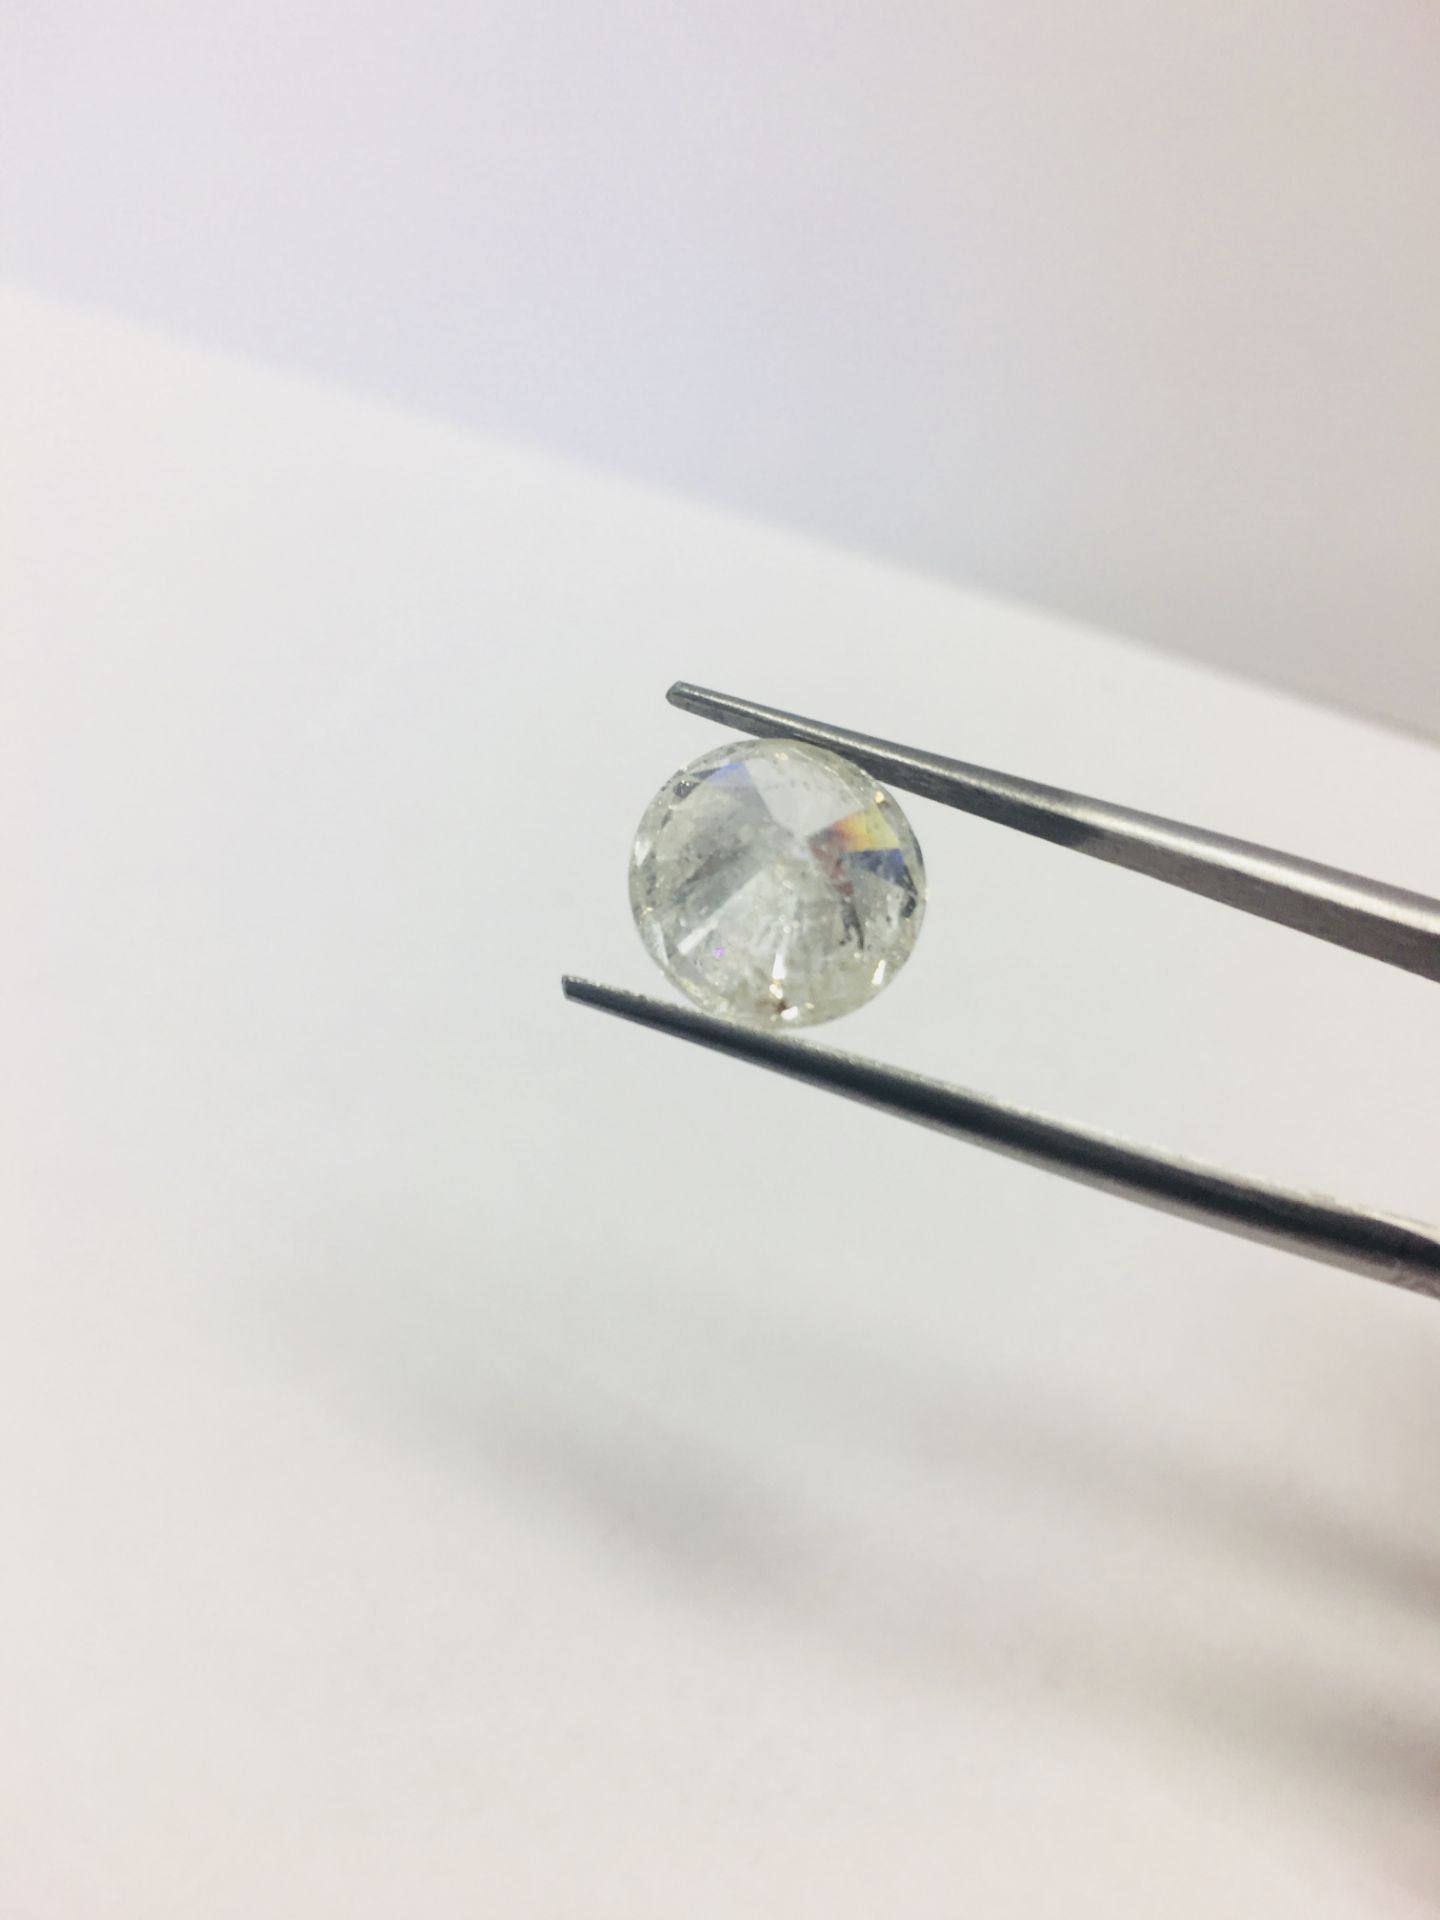 5.11ct Round Brilliant cut diamond,natural,G colour si1 clarity,WGI certification,clarity enhanced - Image 4 of 5